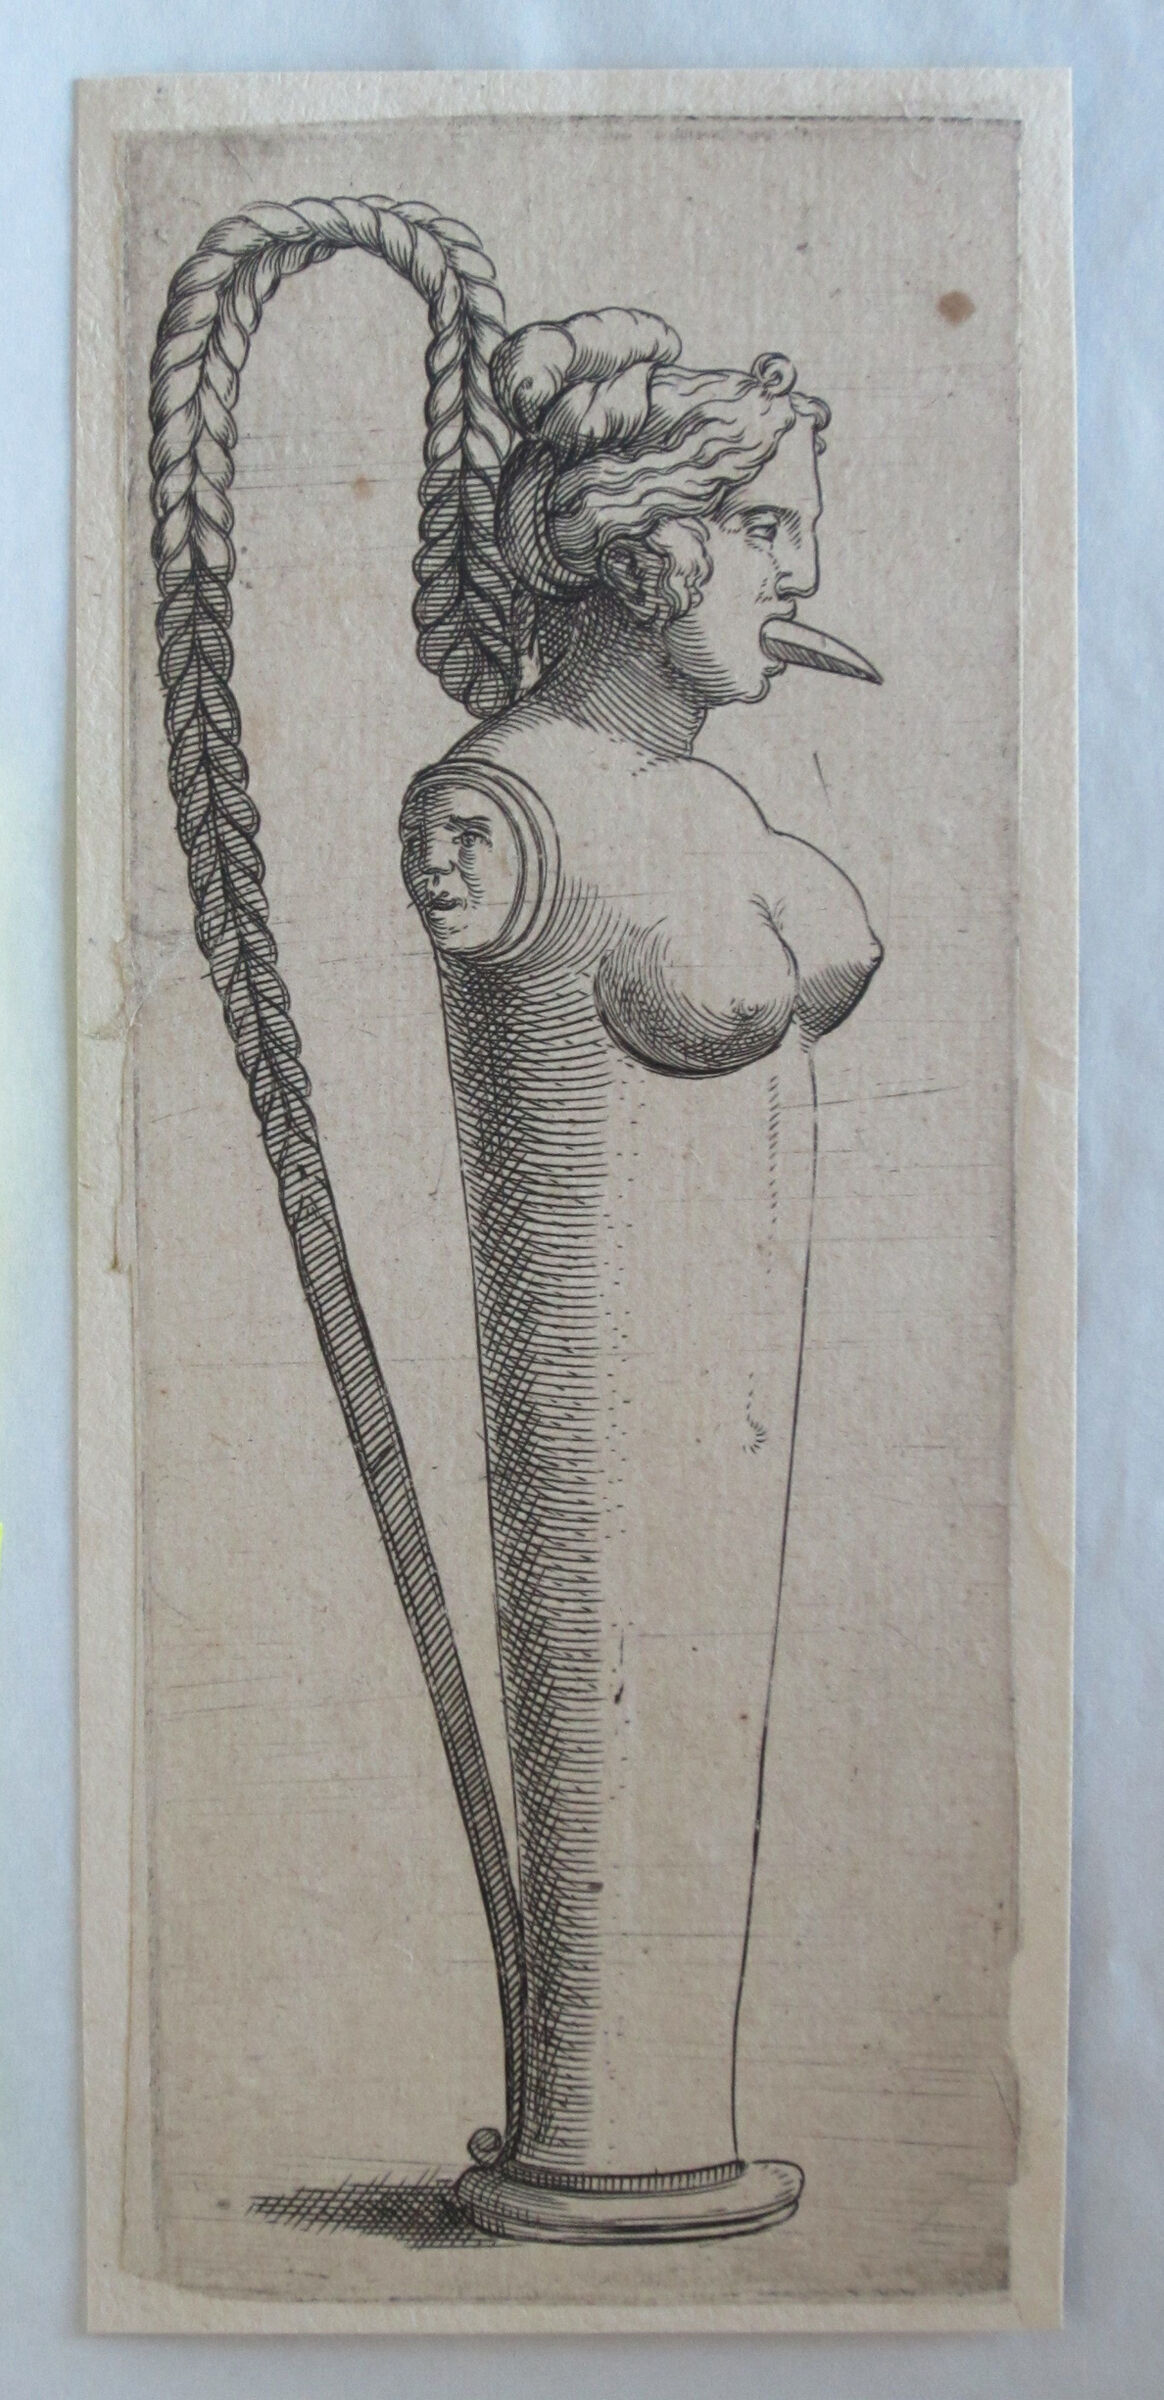 Tall Covered Ewer In The Form Of A Nude Female, The Handle Her Braided Hair, The Spout Her Protruding Tongue